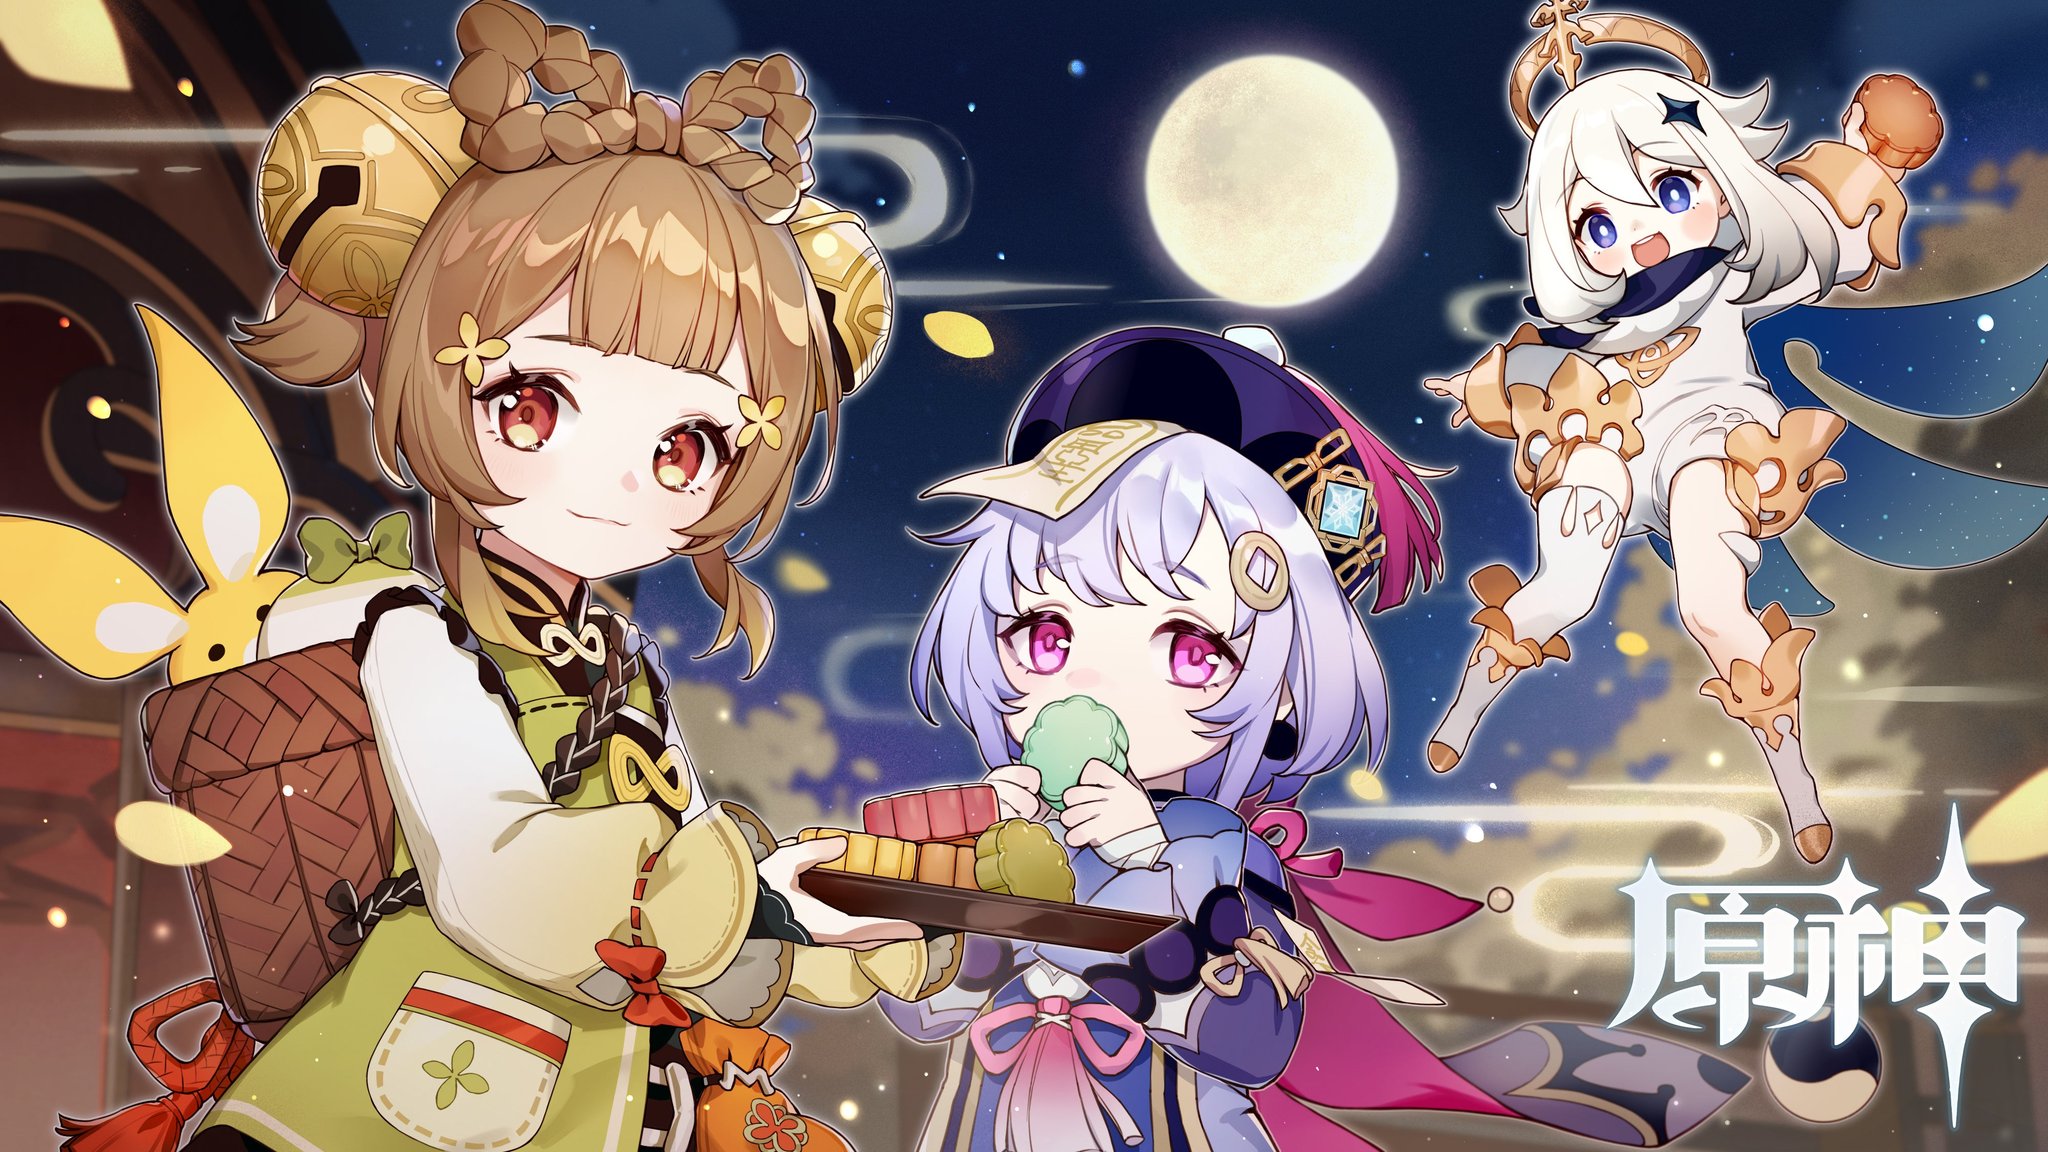 Zeniet on Twitter: "Official Art from Genshin Impact Qiqi and YaoYao  celebrating in a Mid-Autumn Festival! Yaoyao is a Dendro element character  that wields a catalyst (CBT datamine info) #GenshinImpact #原神…  https://t.co/3xbxv8GJEe"